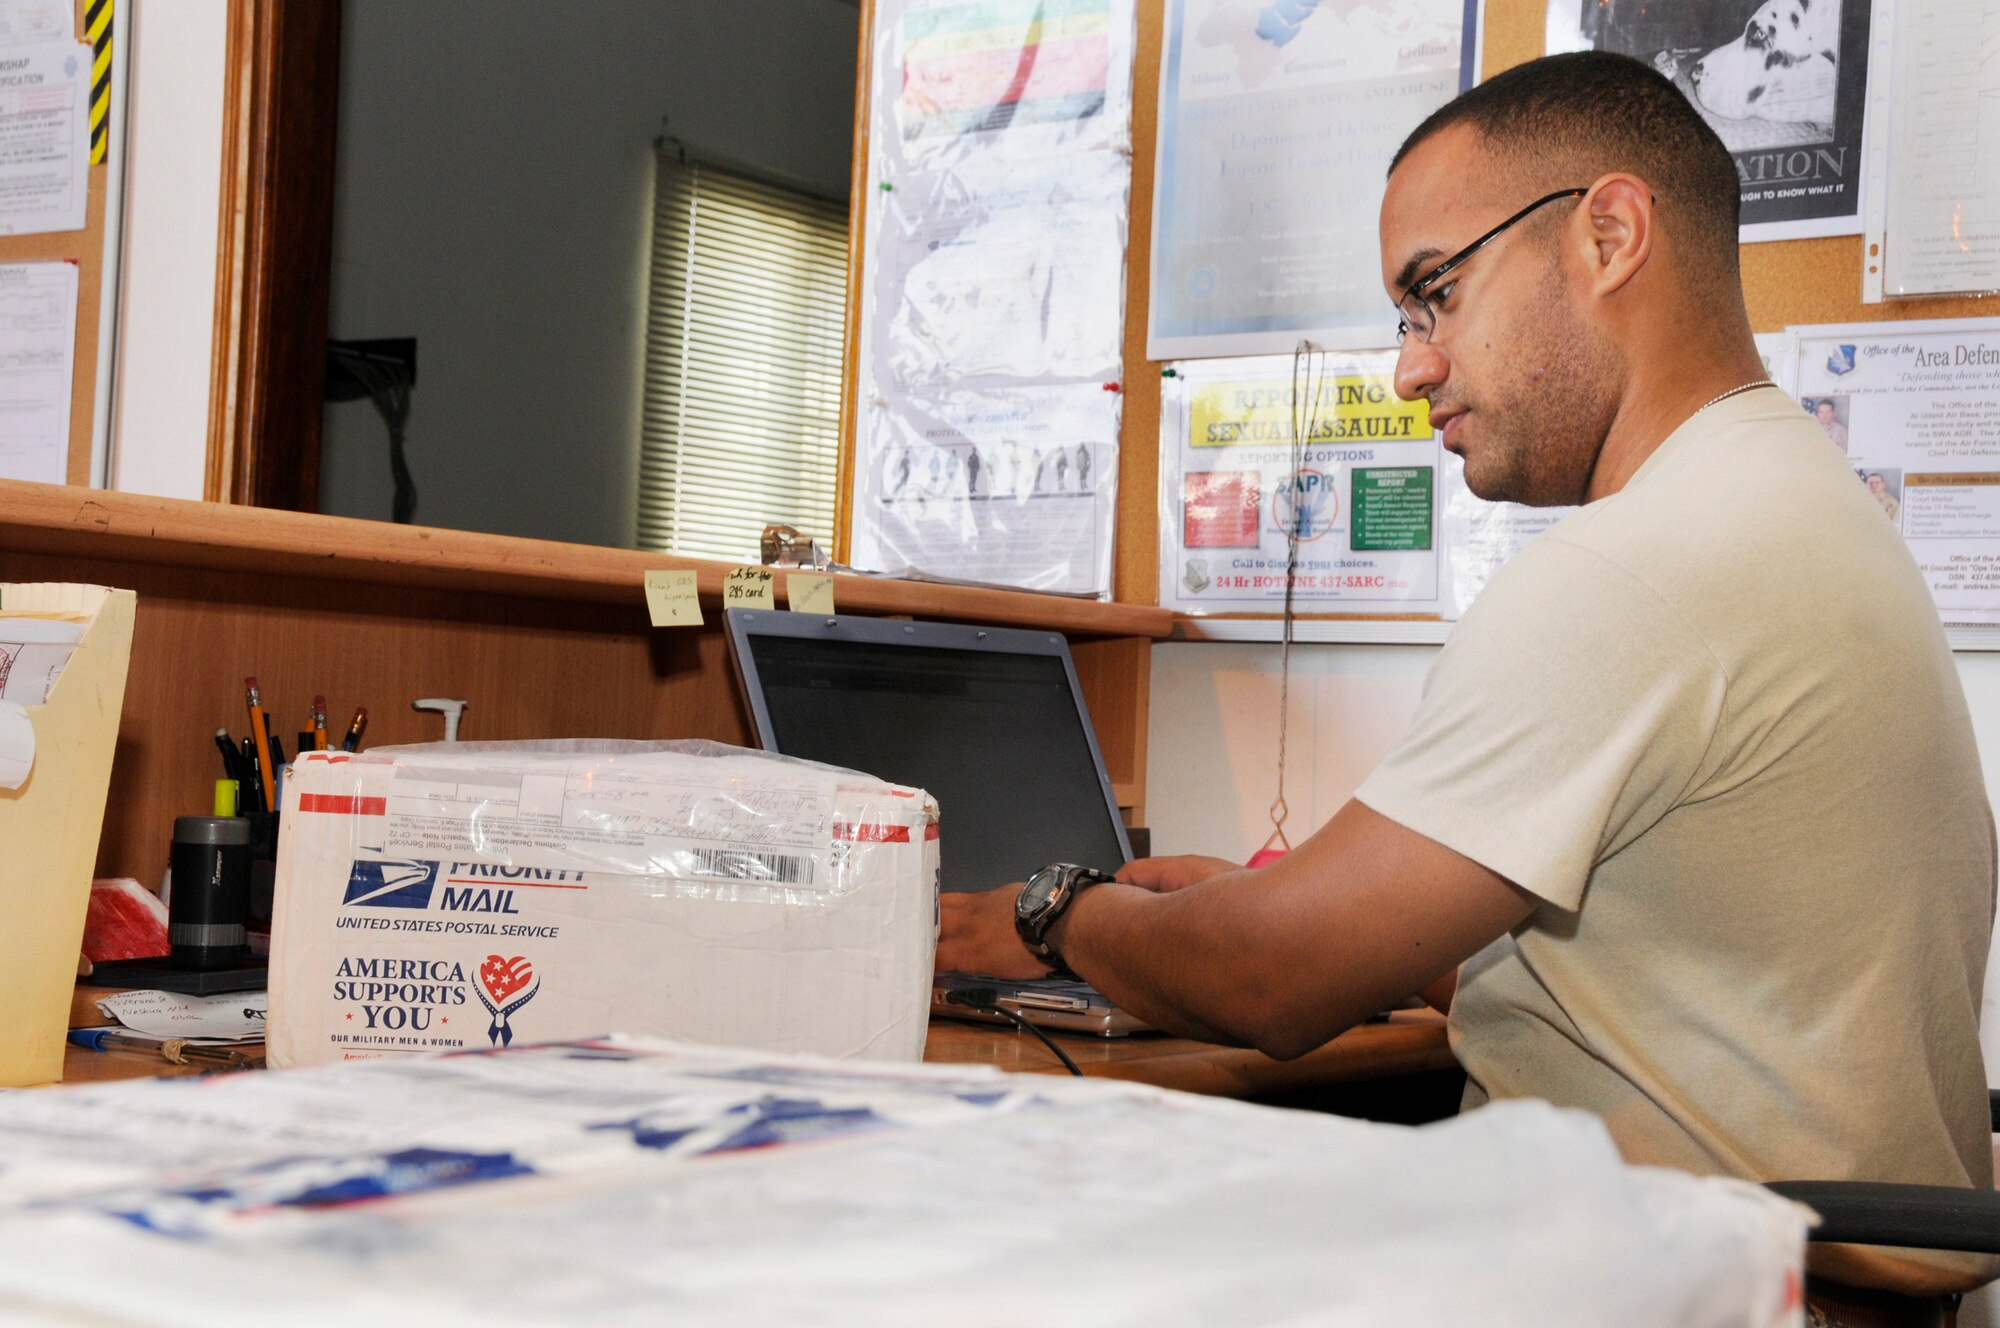 Staff Sgt. Eduardo Hurtado, 379th Expeditionary Communications Squadron, enters a United States Postal Service code to manually track accountable mail passing through the system Sept. 30, 2008.  A night crew delivers the next day?s mail to the Air Mail Terminal, where the day shift sorts it and places it into bins for each squadron at this undisclosed air base in Southwest Asia.  Sergeant Hurtado, a native of Somerville, Mass., is deployed from Westover Air Reserve Base, Mass., in support of Operations Iraqi and Enduring Freedom and Joint Task Force-Horn of Africa.  (U.S. Air Force photo by Tech. Sgt. Michael Boquette/Released)